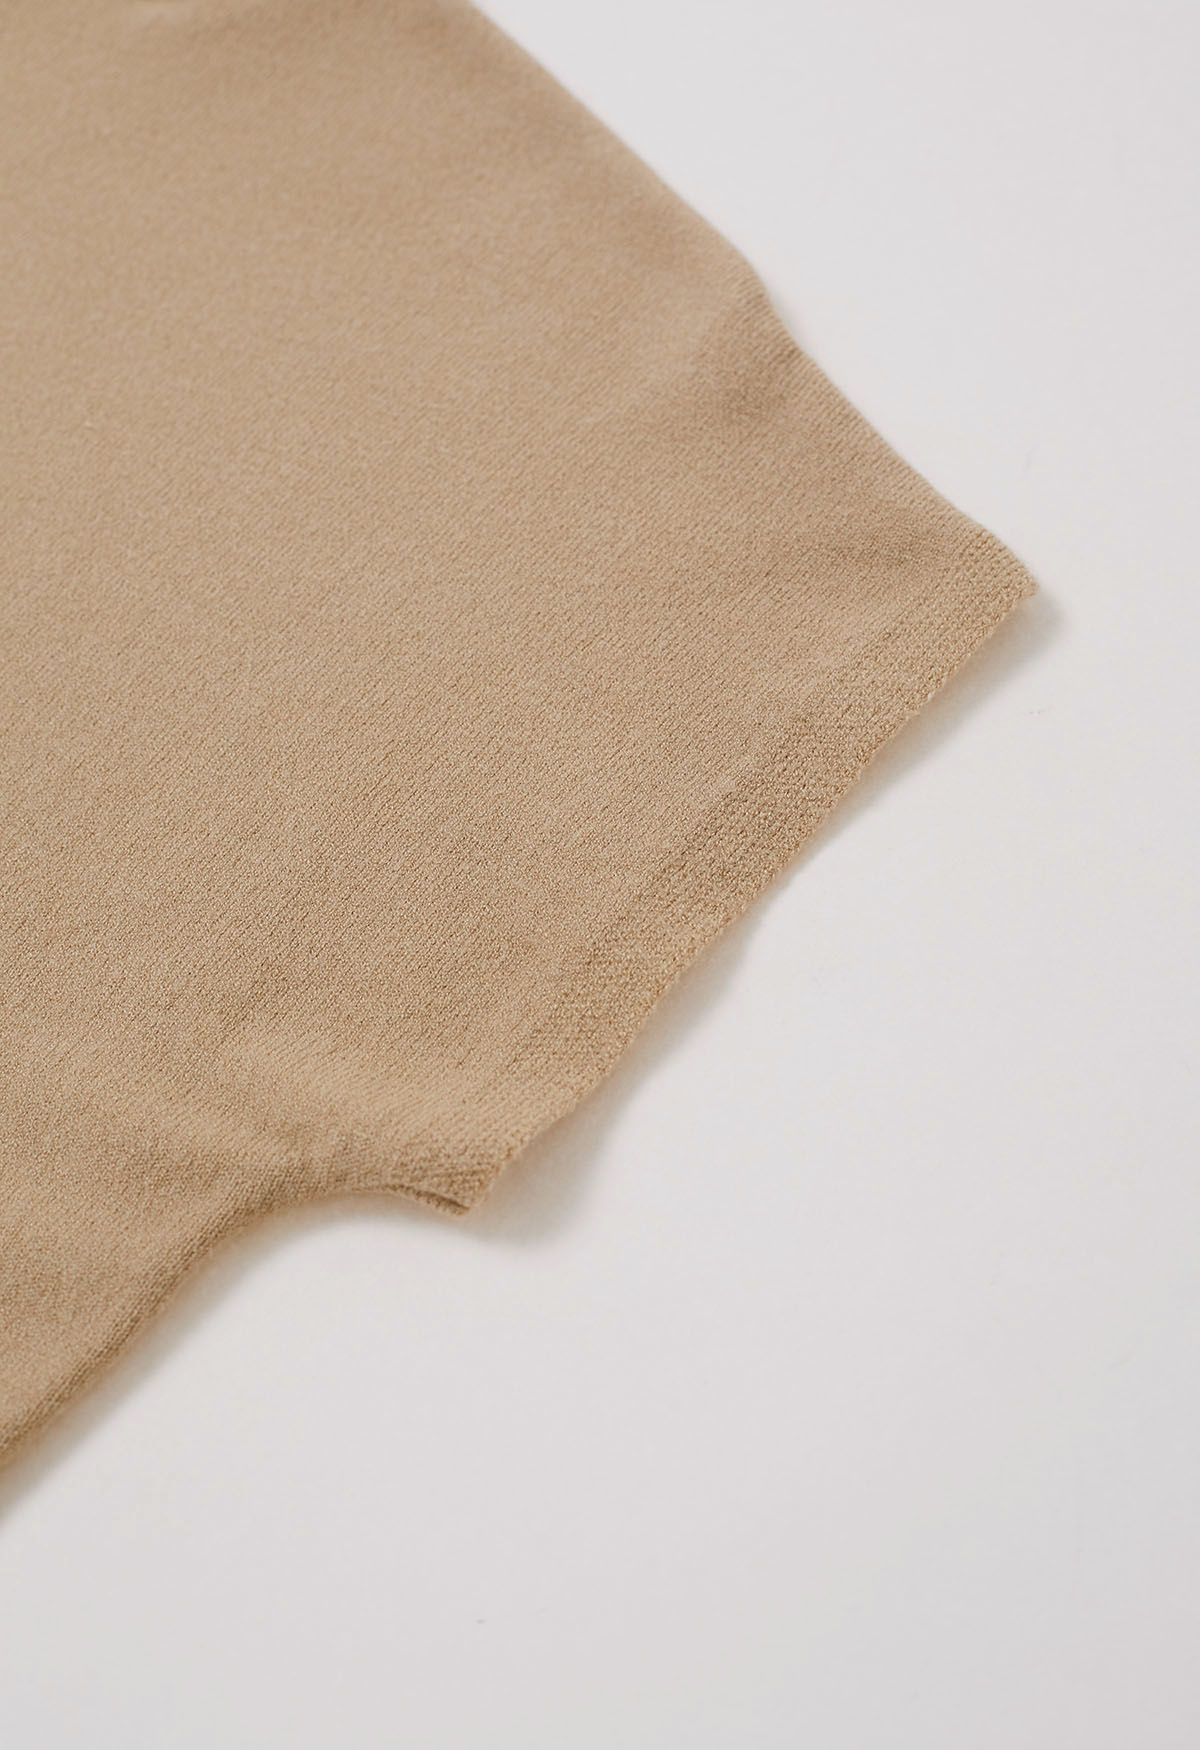 Solid Color Cap Sleeves Knit Top in Tan